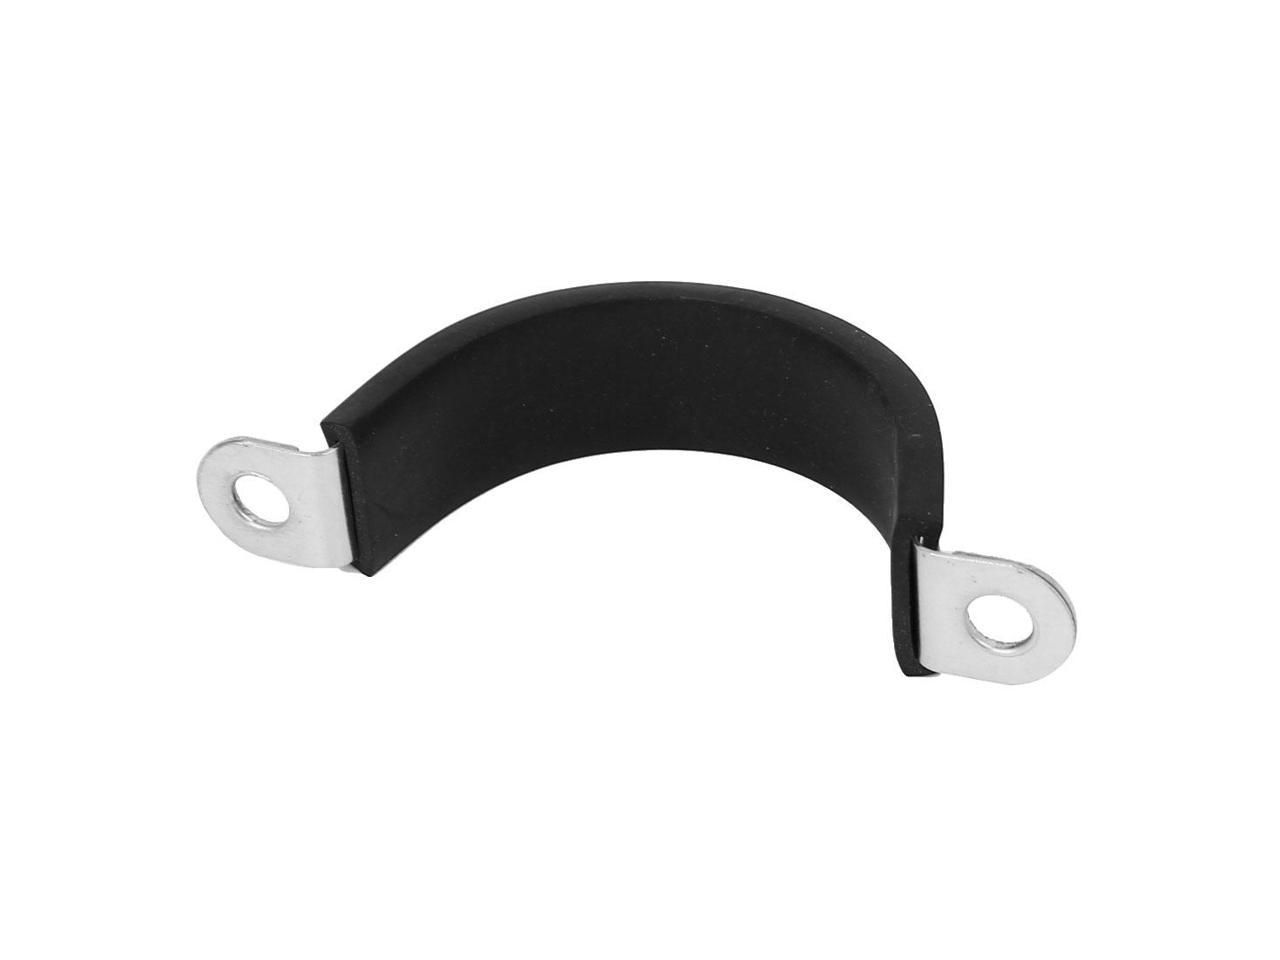 38mm U Clips EPDM Rubber Lined Mounting Brackets 5pcs for Pipe Tube Cable 